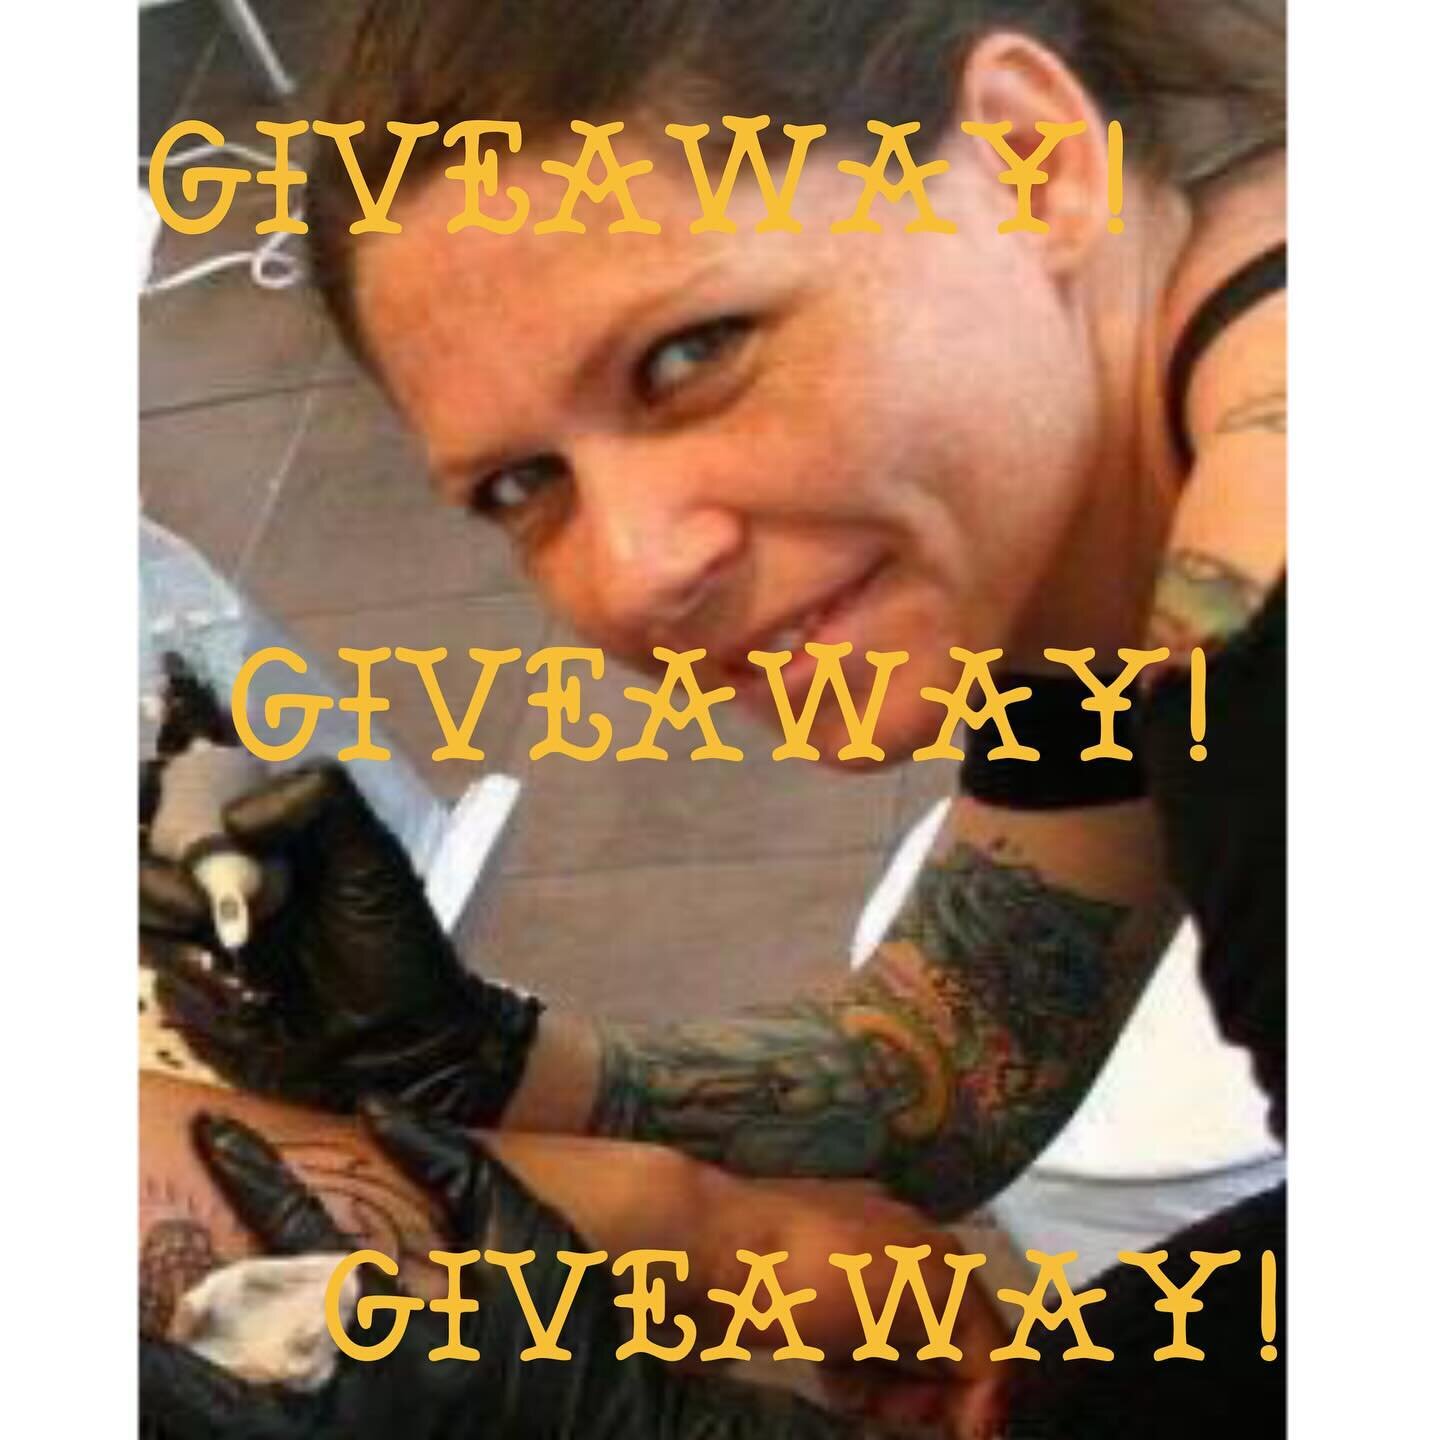 TATTOO GIVEAWAY!!
ONLY 5 DAYS LEFT TO ENTER!
SHARE THIS POST FOR A BONUS ENTRY!

We are celebrating @shelly_turner_ birthday and 30th anniversary tattooing with a giveaway!!!
1st Prize- $2,222 tattoo
2nd Prize- $222 tattoo
Give away rules:
1.  Send a